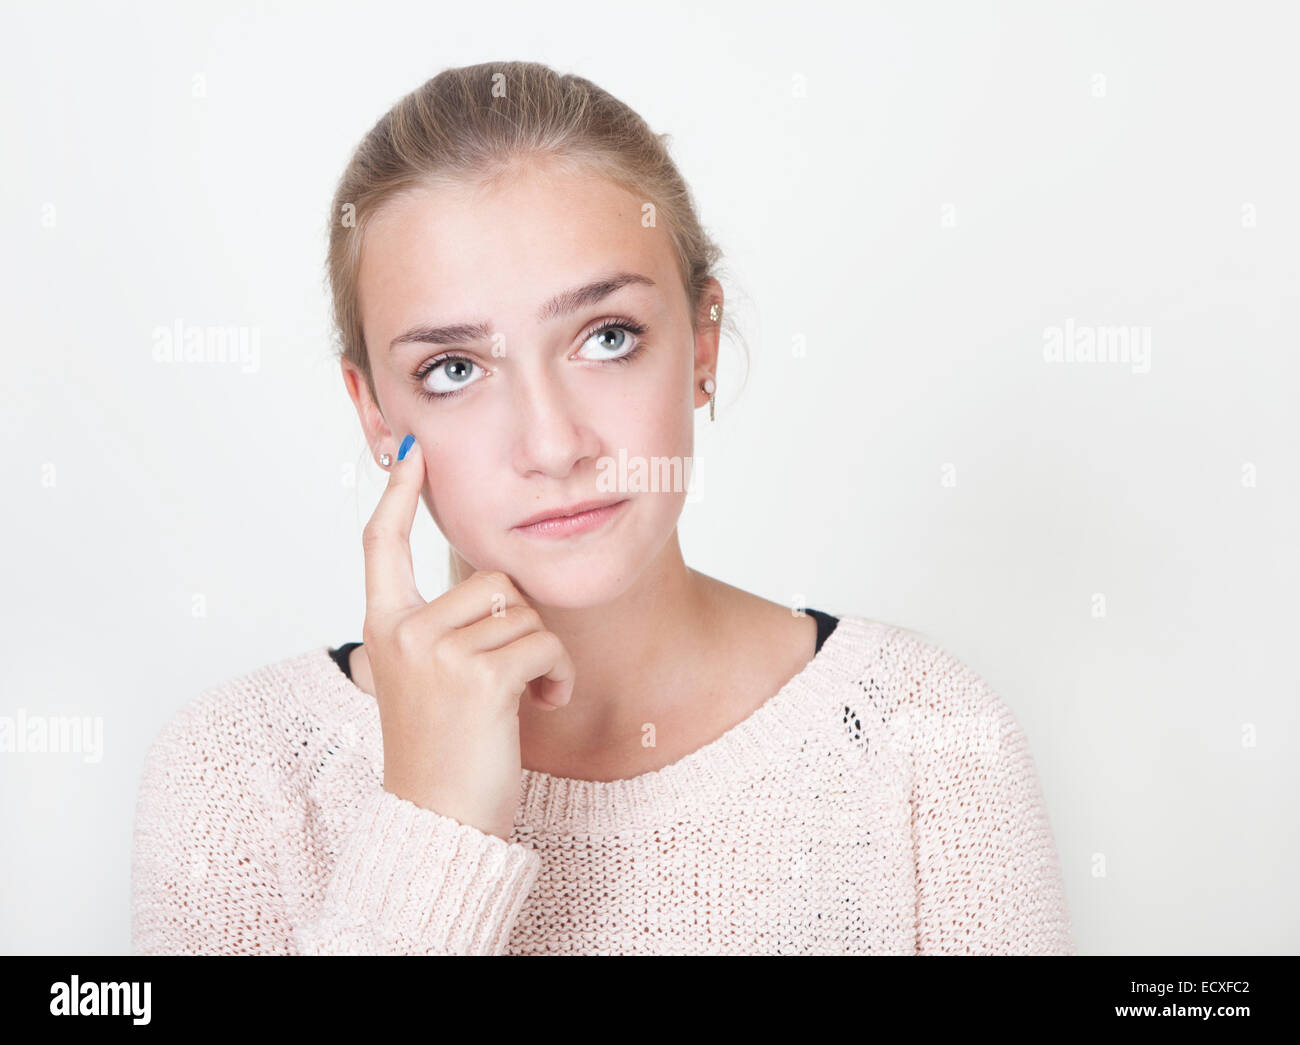 young woman with blond hair and blue eyes thinking, portrait Stock Photo